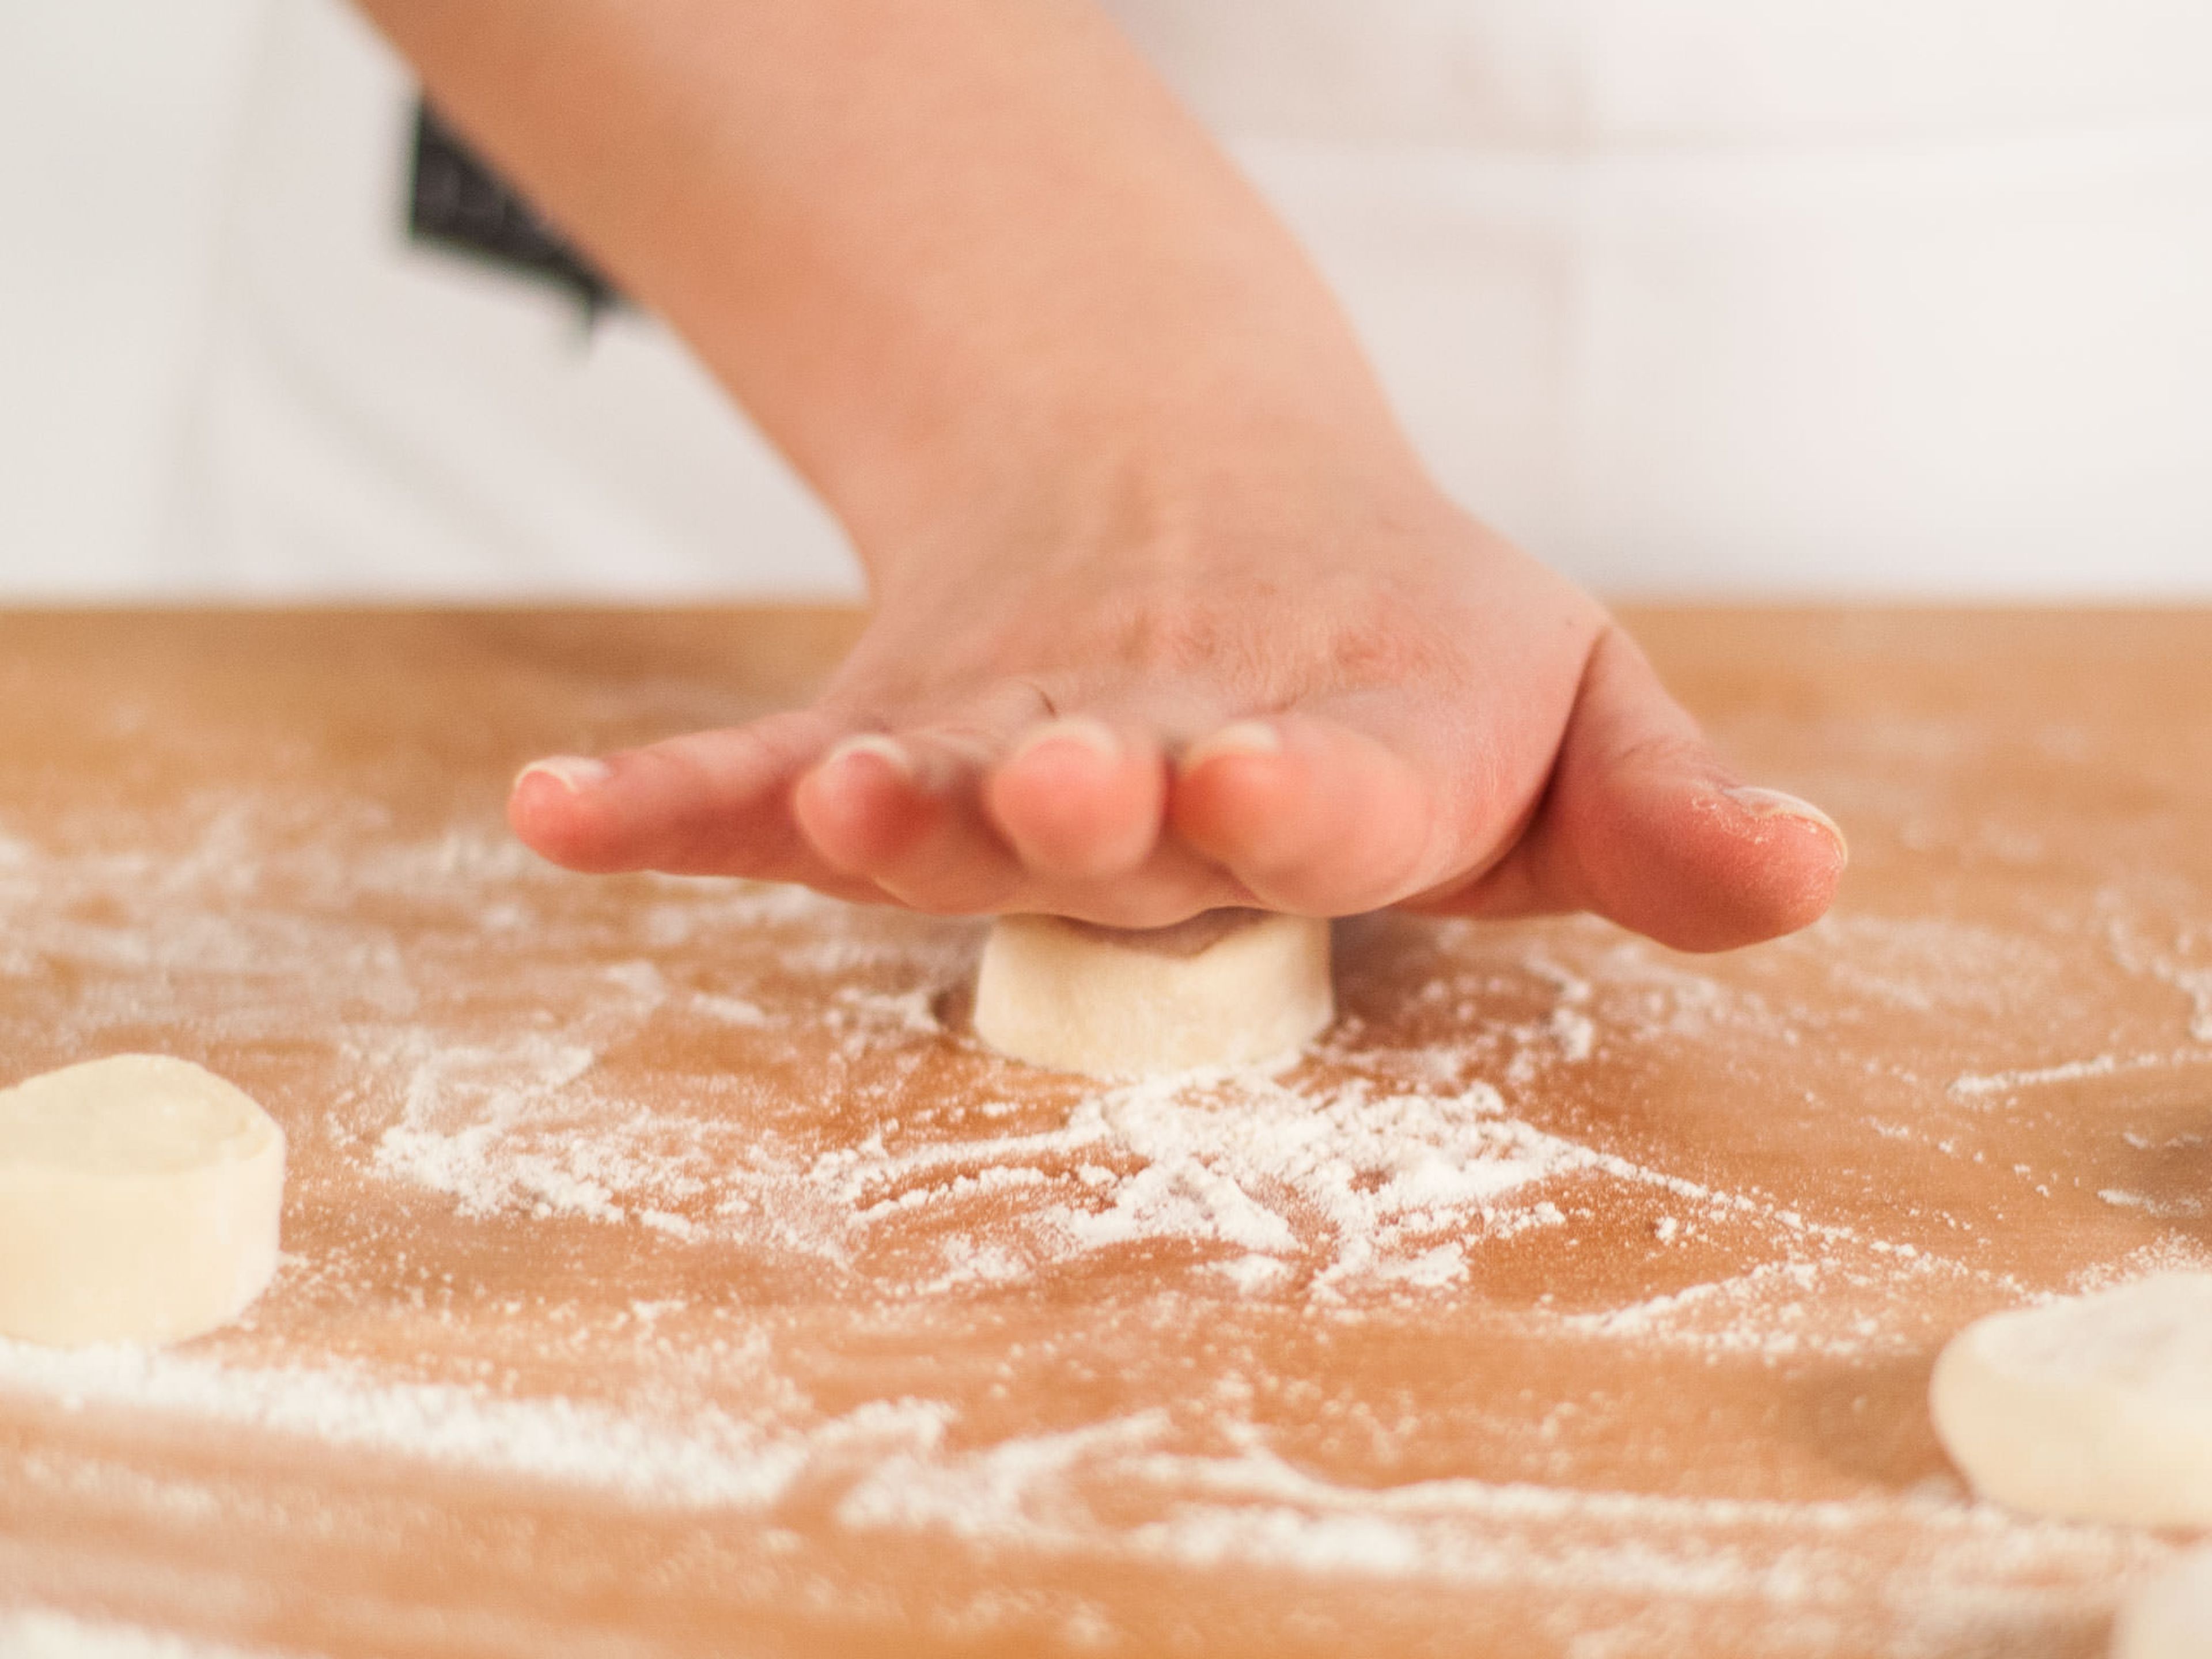 Roll dough portions on a lightly floured surface to cover each side with flour. Then, using little pressure, flatten the dough pieces with the palm of your hand.